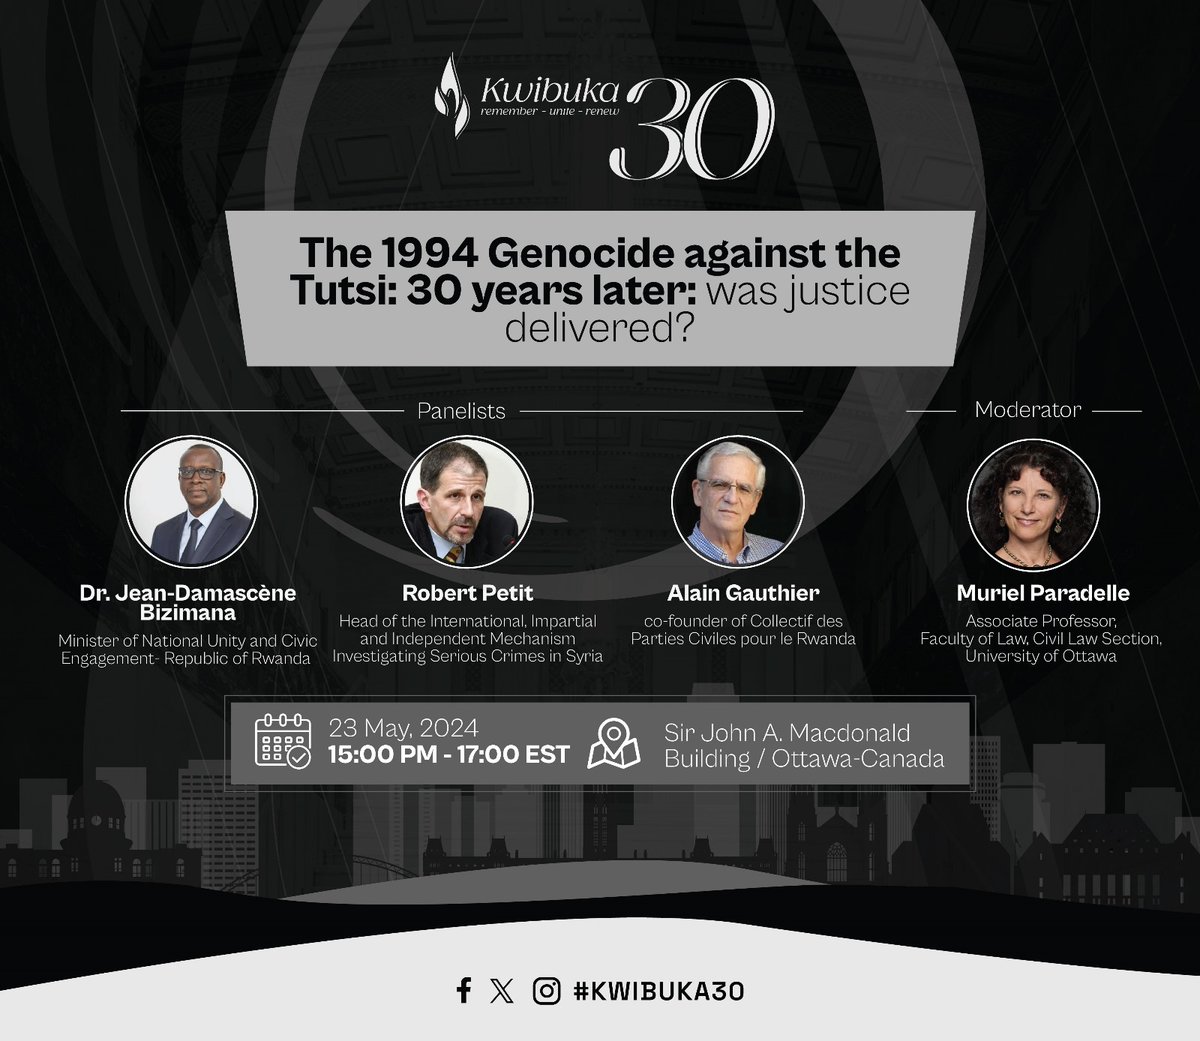 'The 1994 Genocide against the Tutsi, 30 years later: Was justice delivered?' Min. @DrDamascene will be among the panelists discussing this topic starting at 9 PM to 11 PM (Rwanda time) at the Sir John A. Macdonald Building in Ottawa, Canada. Follow Live: youtube.com/live/hxq1RdqS6…